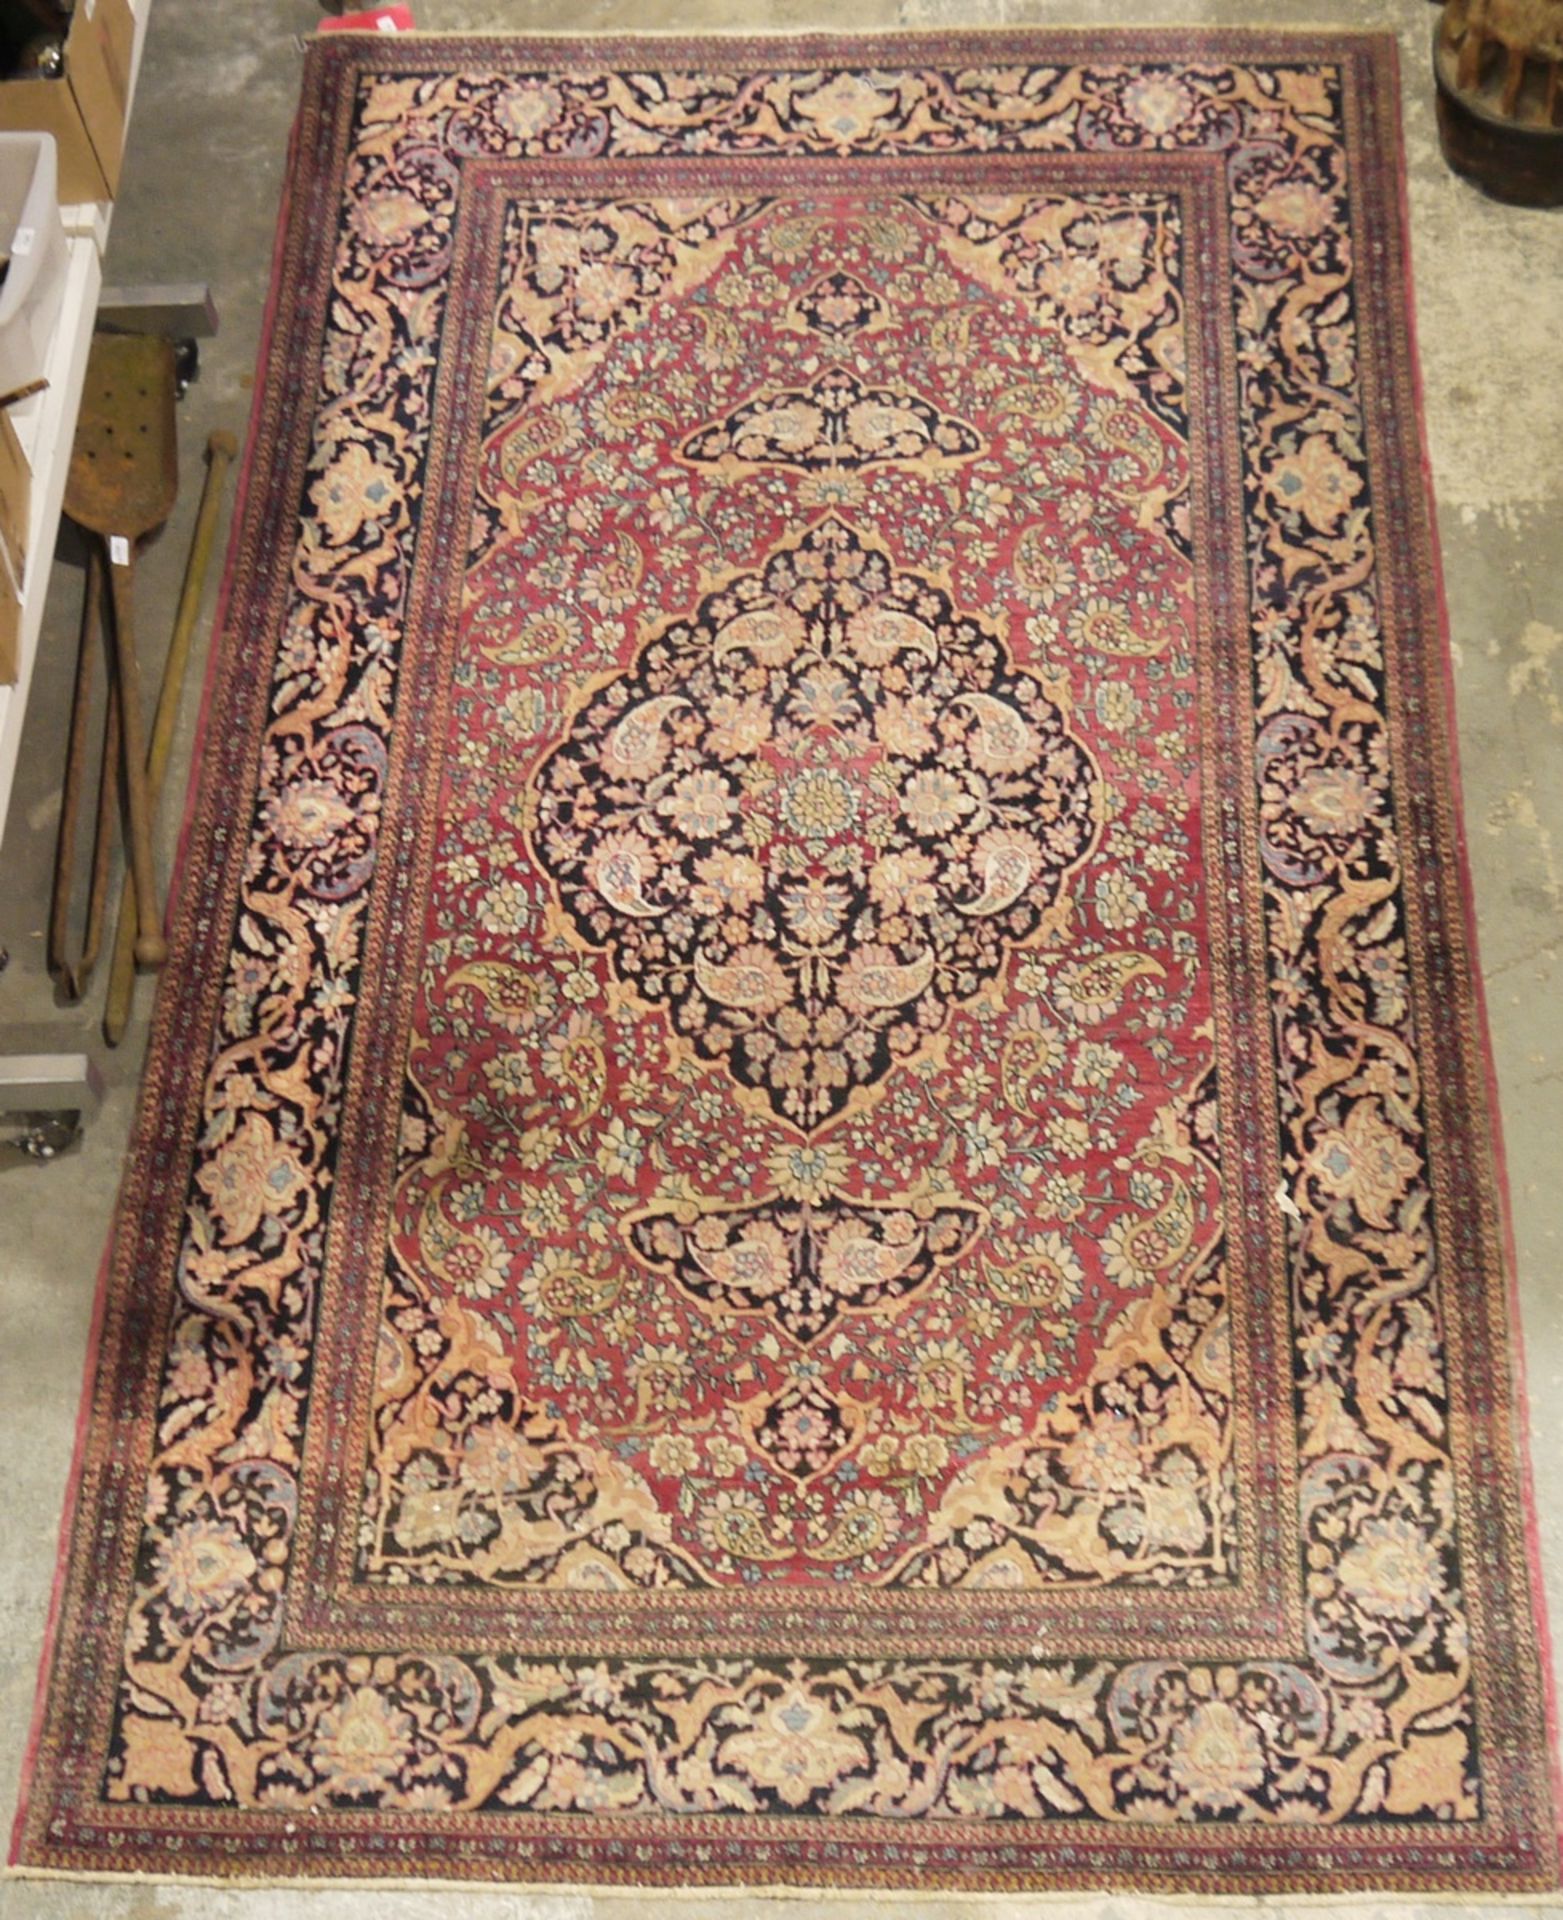 Eastern wool rug of Persian design, having black arabesque to the cherry red field with allover